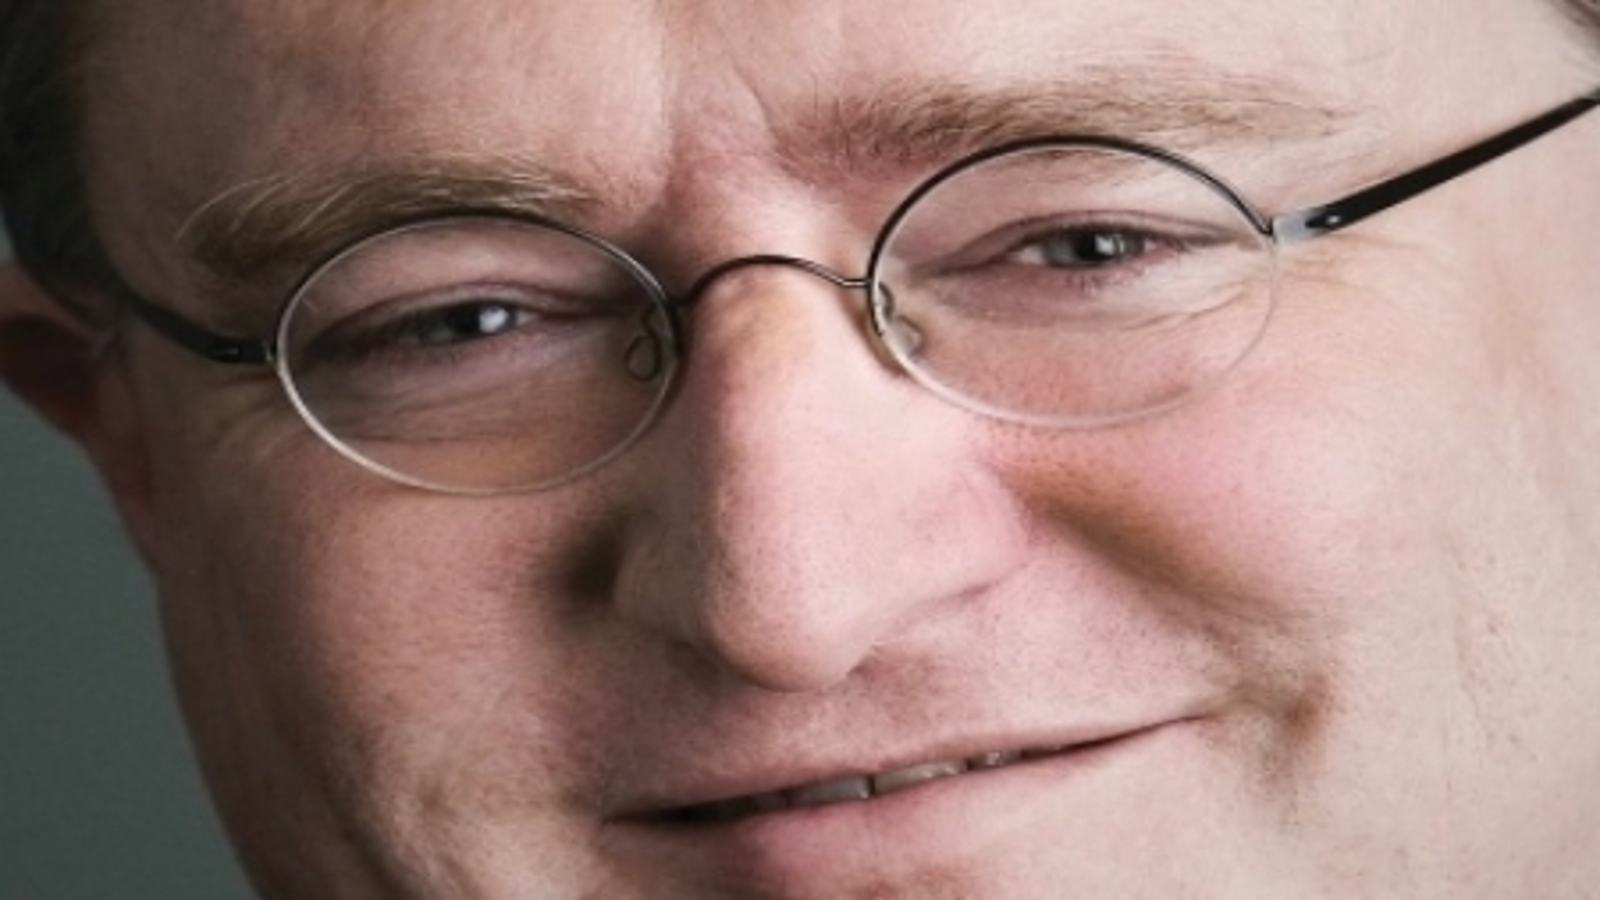 Gabe Newell named as next AIAS Hall of Famer